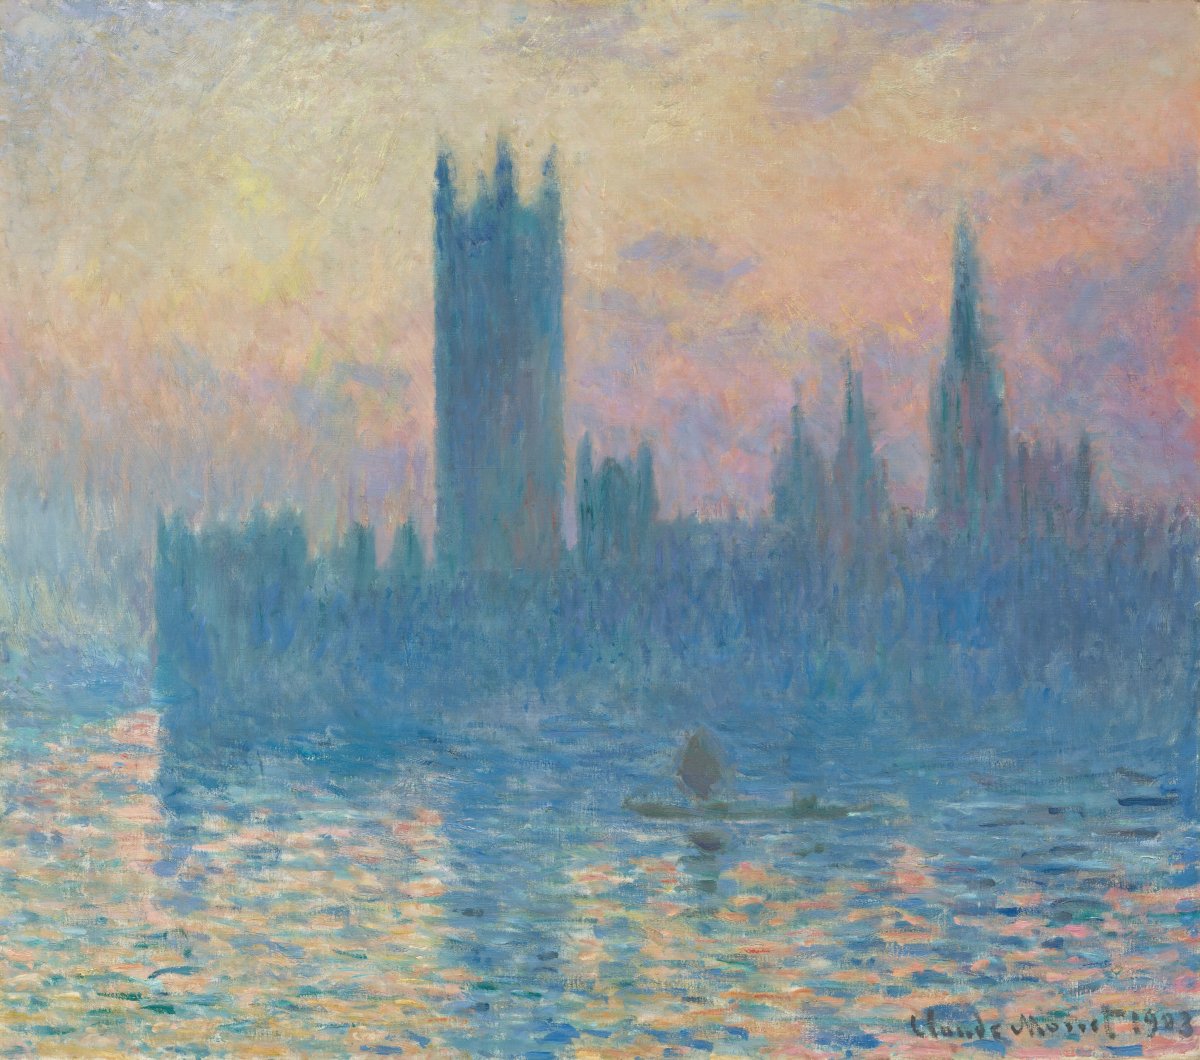 The Houses of Parliament at Sunset